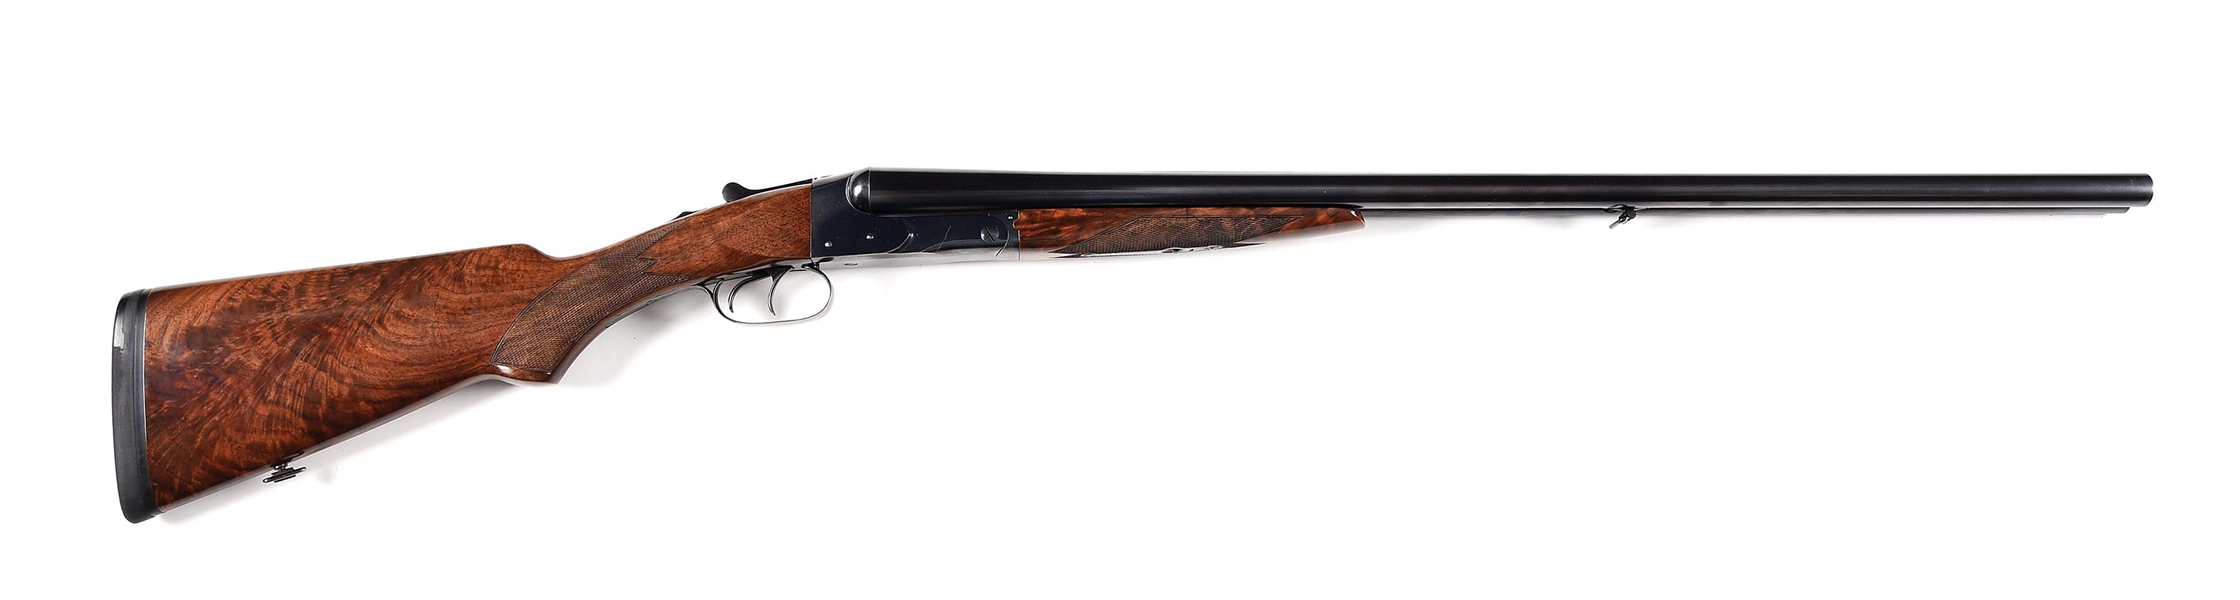 (M) WINCHESTER MODEL 21 SIDE BY SIDE SHOTGUN WITH AFTERMARKET CASE.